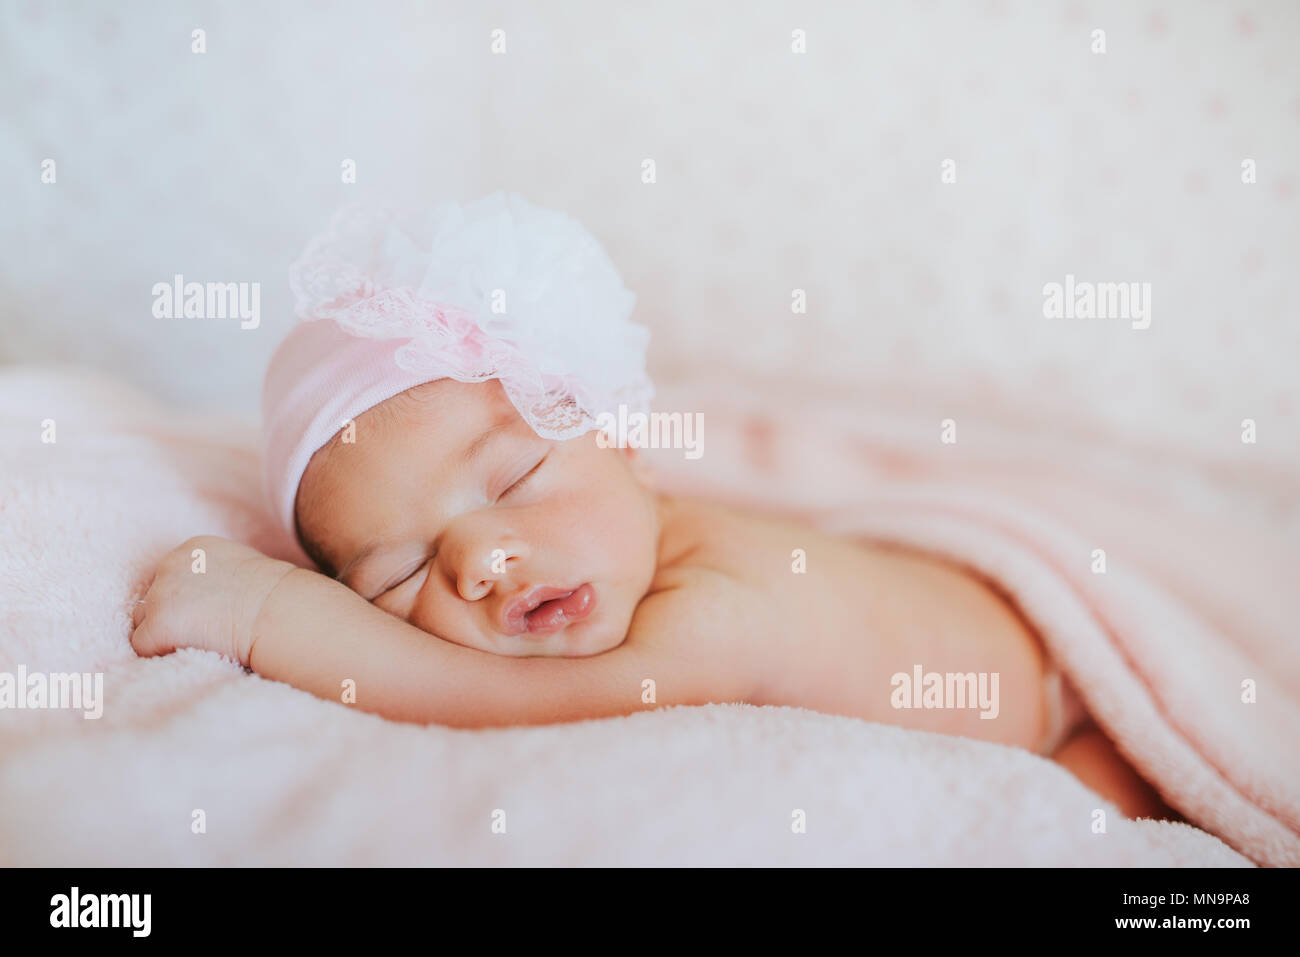 newborn sleeping baby , close-up, lifestyle, the concept of purity and innocence Stock Photo